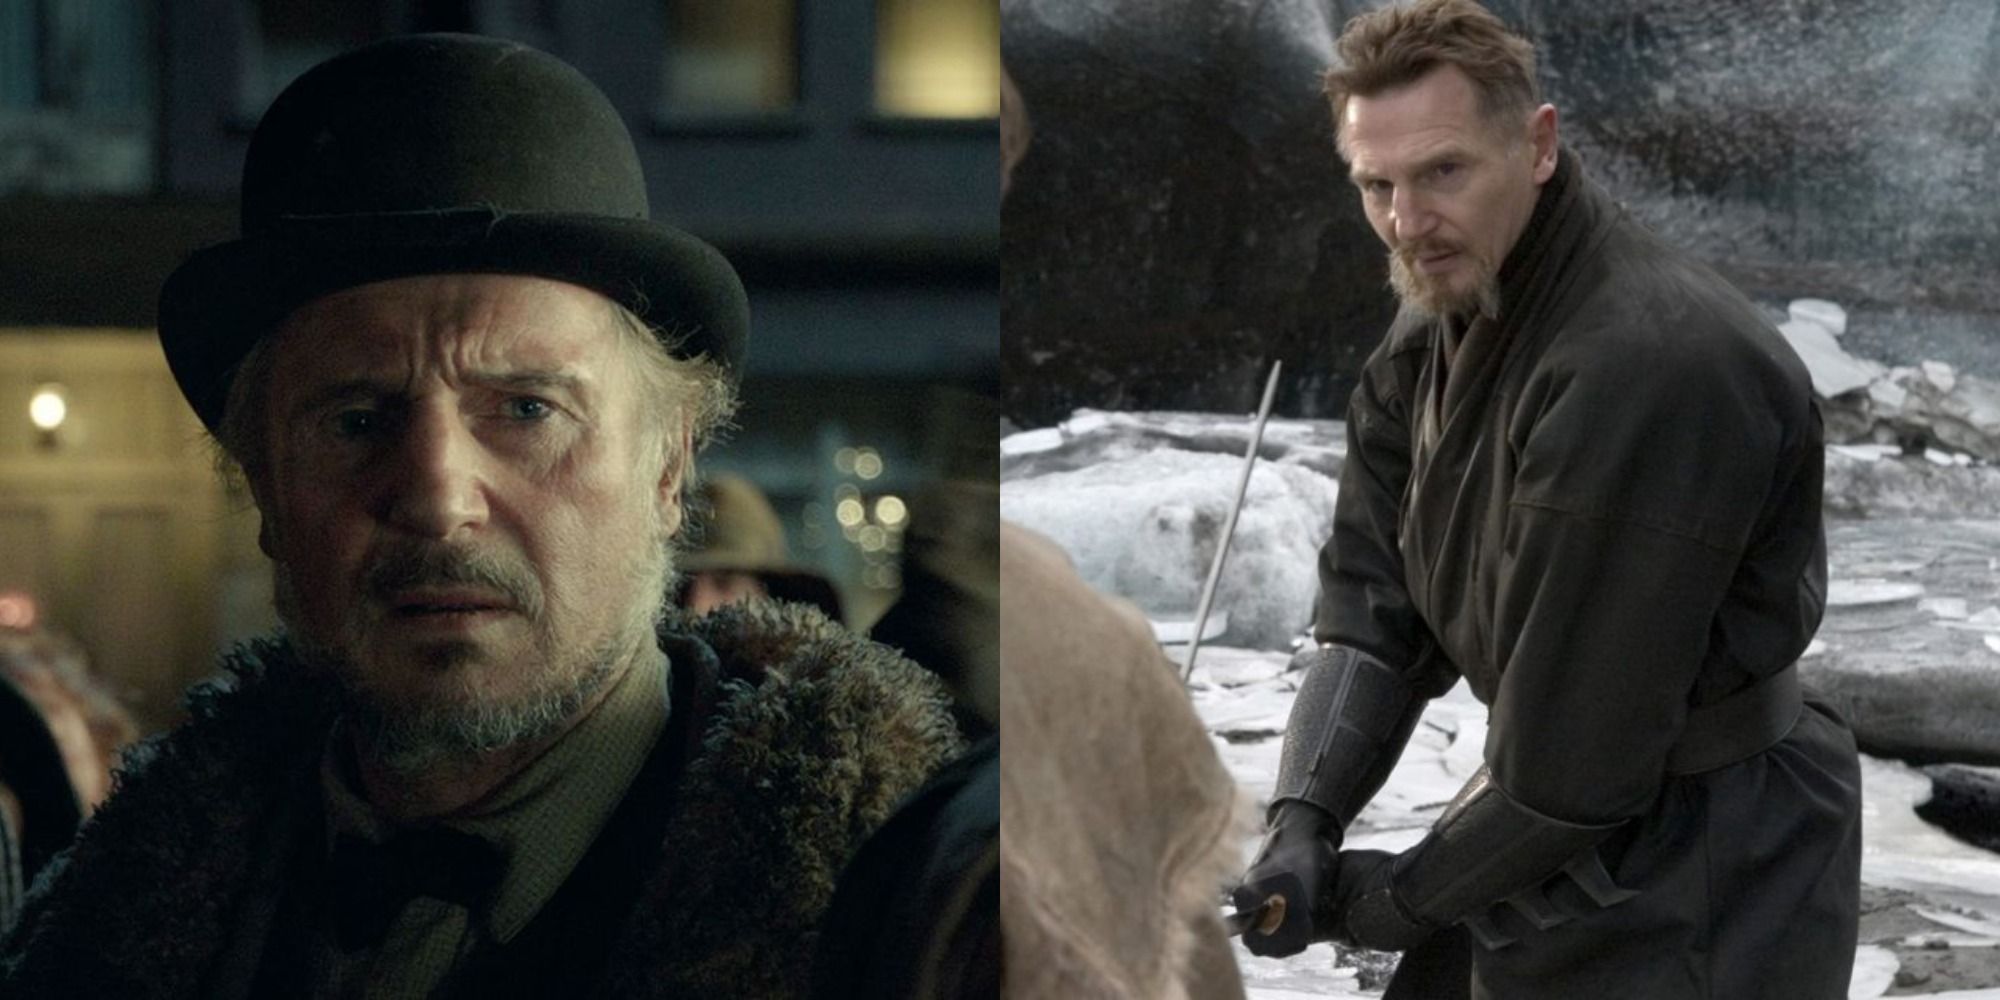 Split image of Liam Neeson in The Ballad of Buster Scruggs and Batman Begins